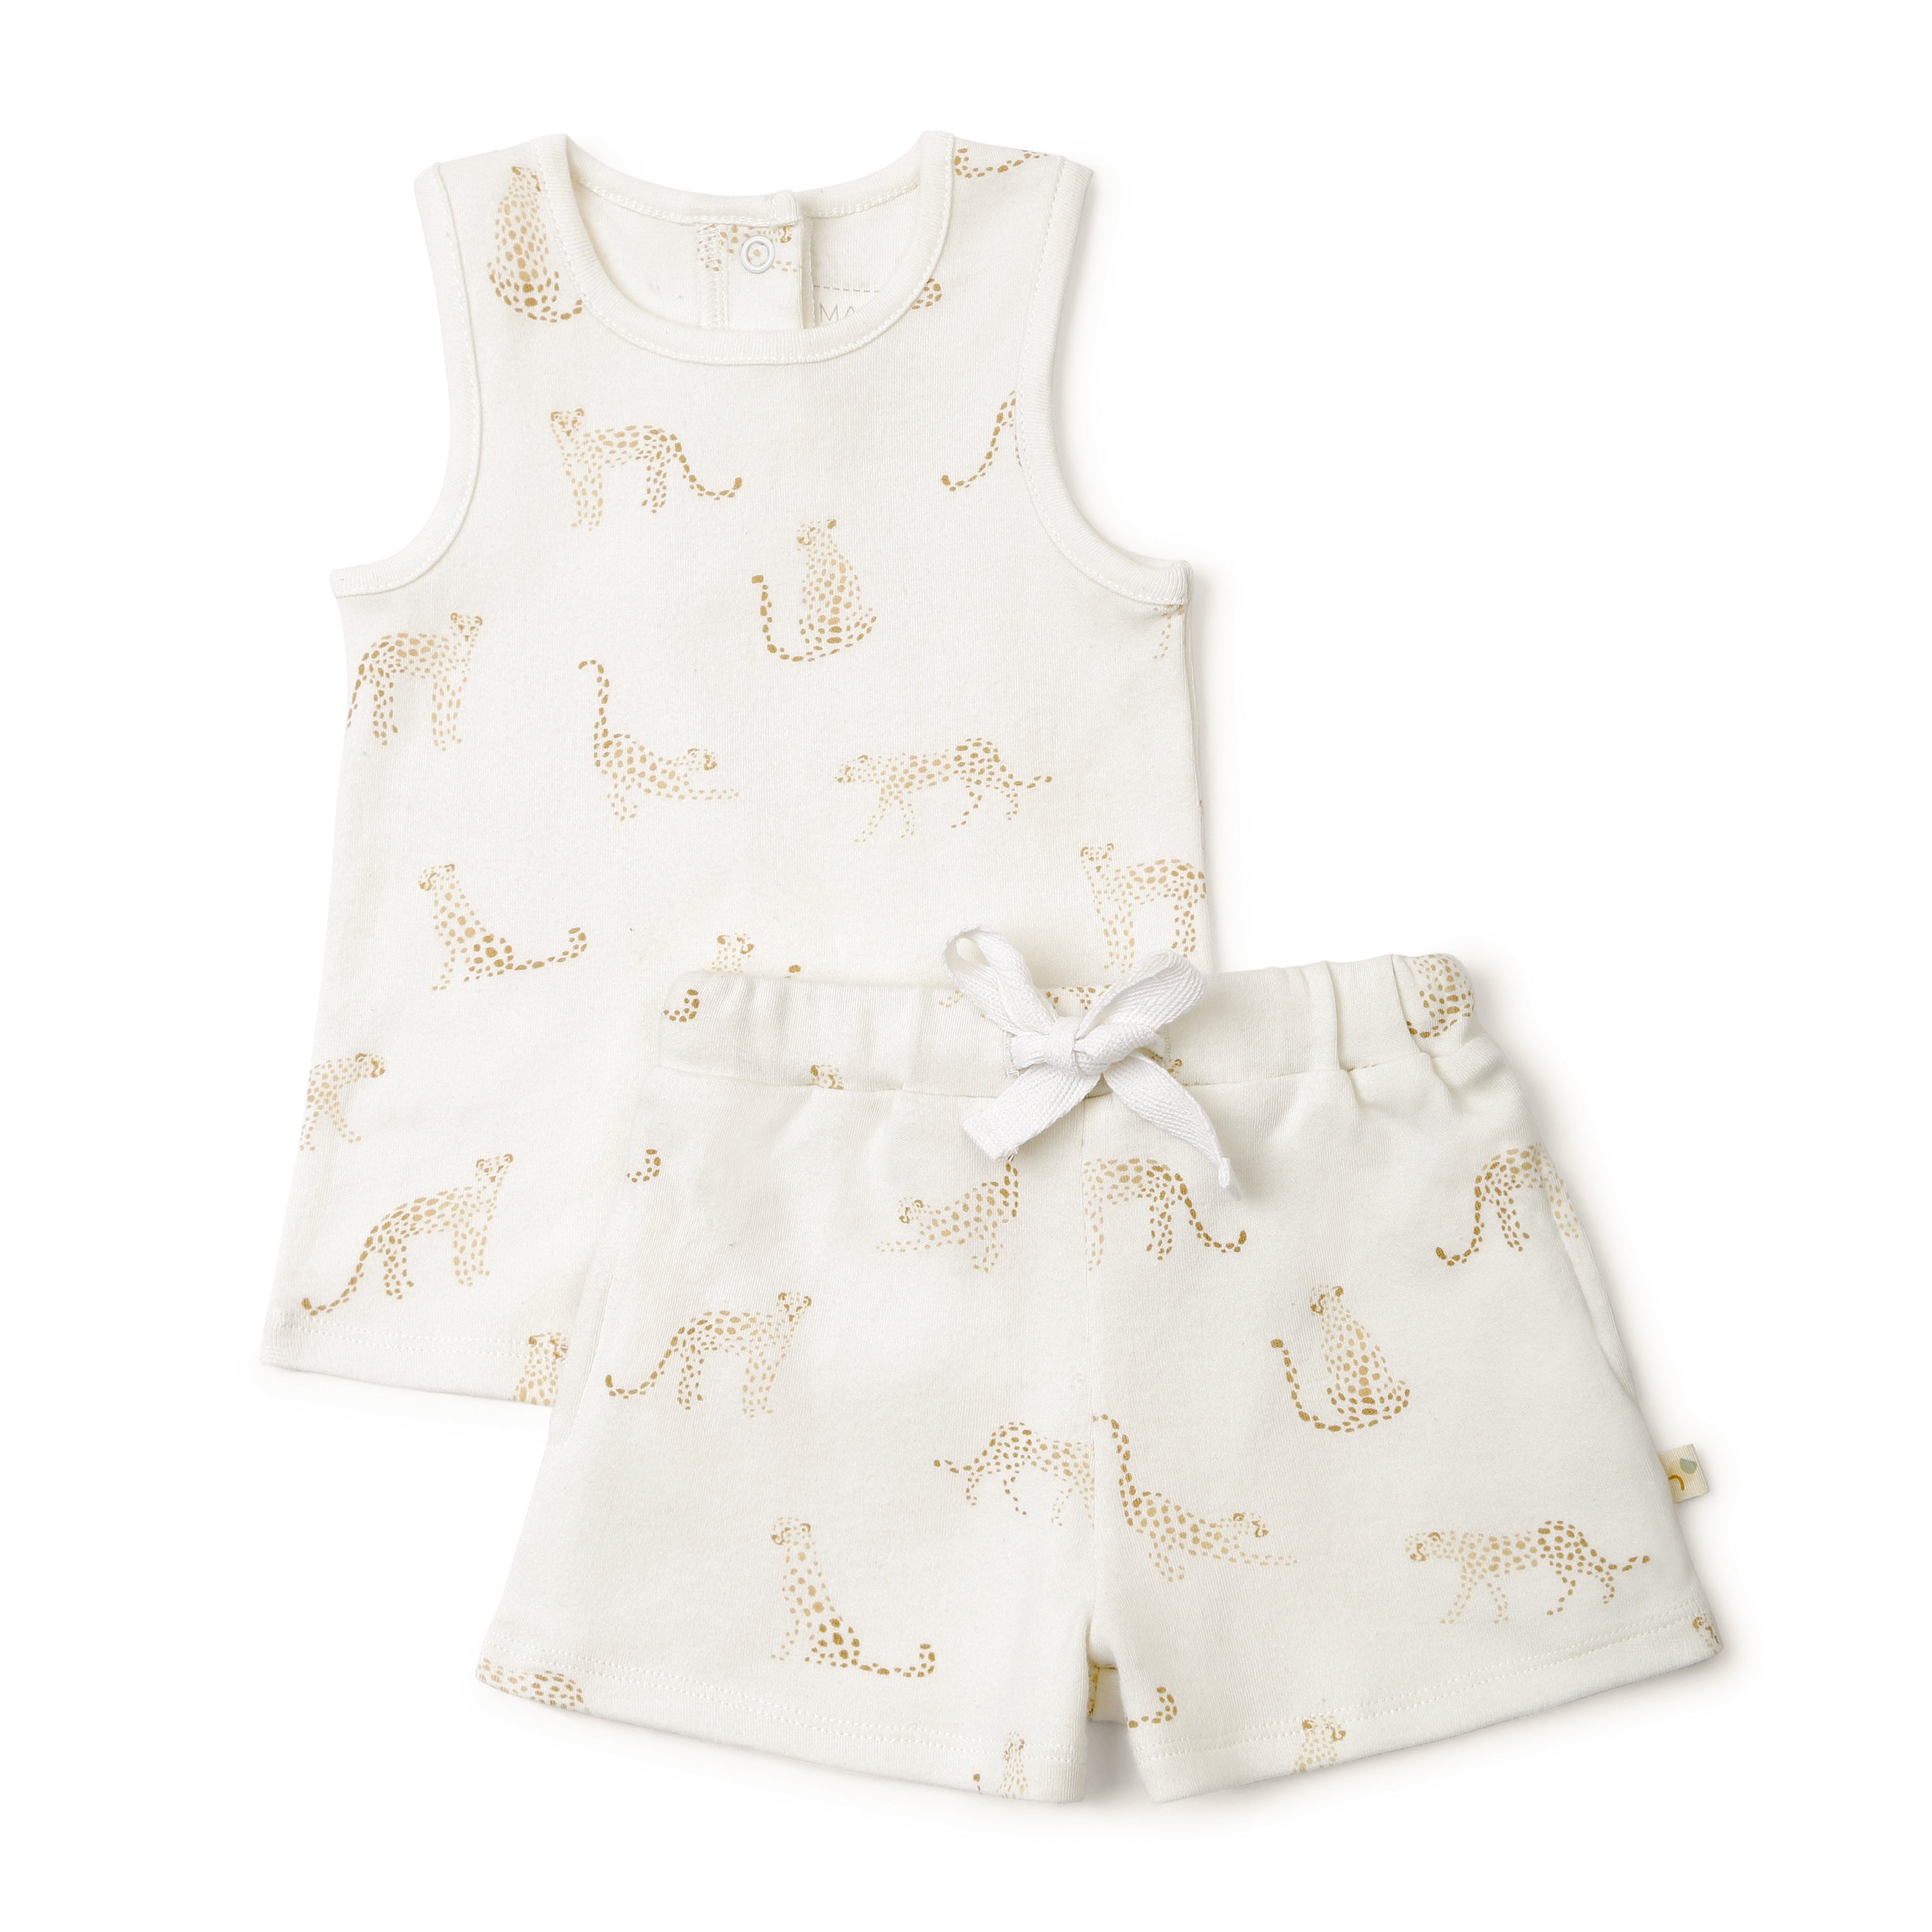 A cream-colored children's outfit from Organic Kids featuring a sleeveless top and matching shorts, both adorned with a golden cheetah print. The shorts have a drawstring at the waist.